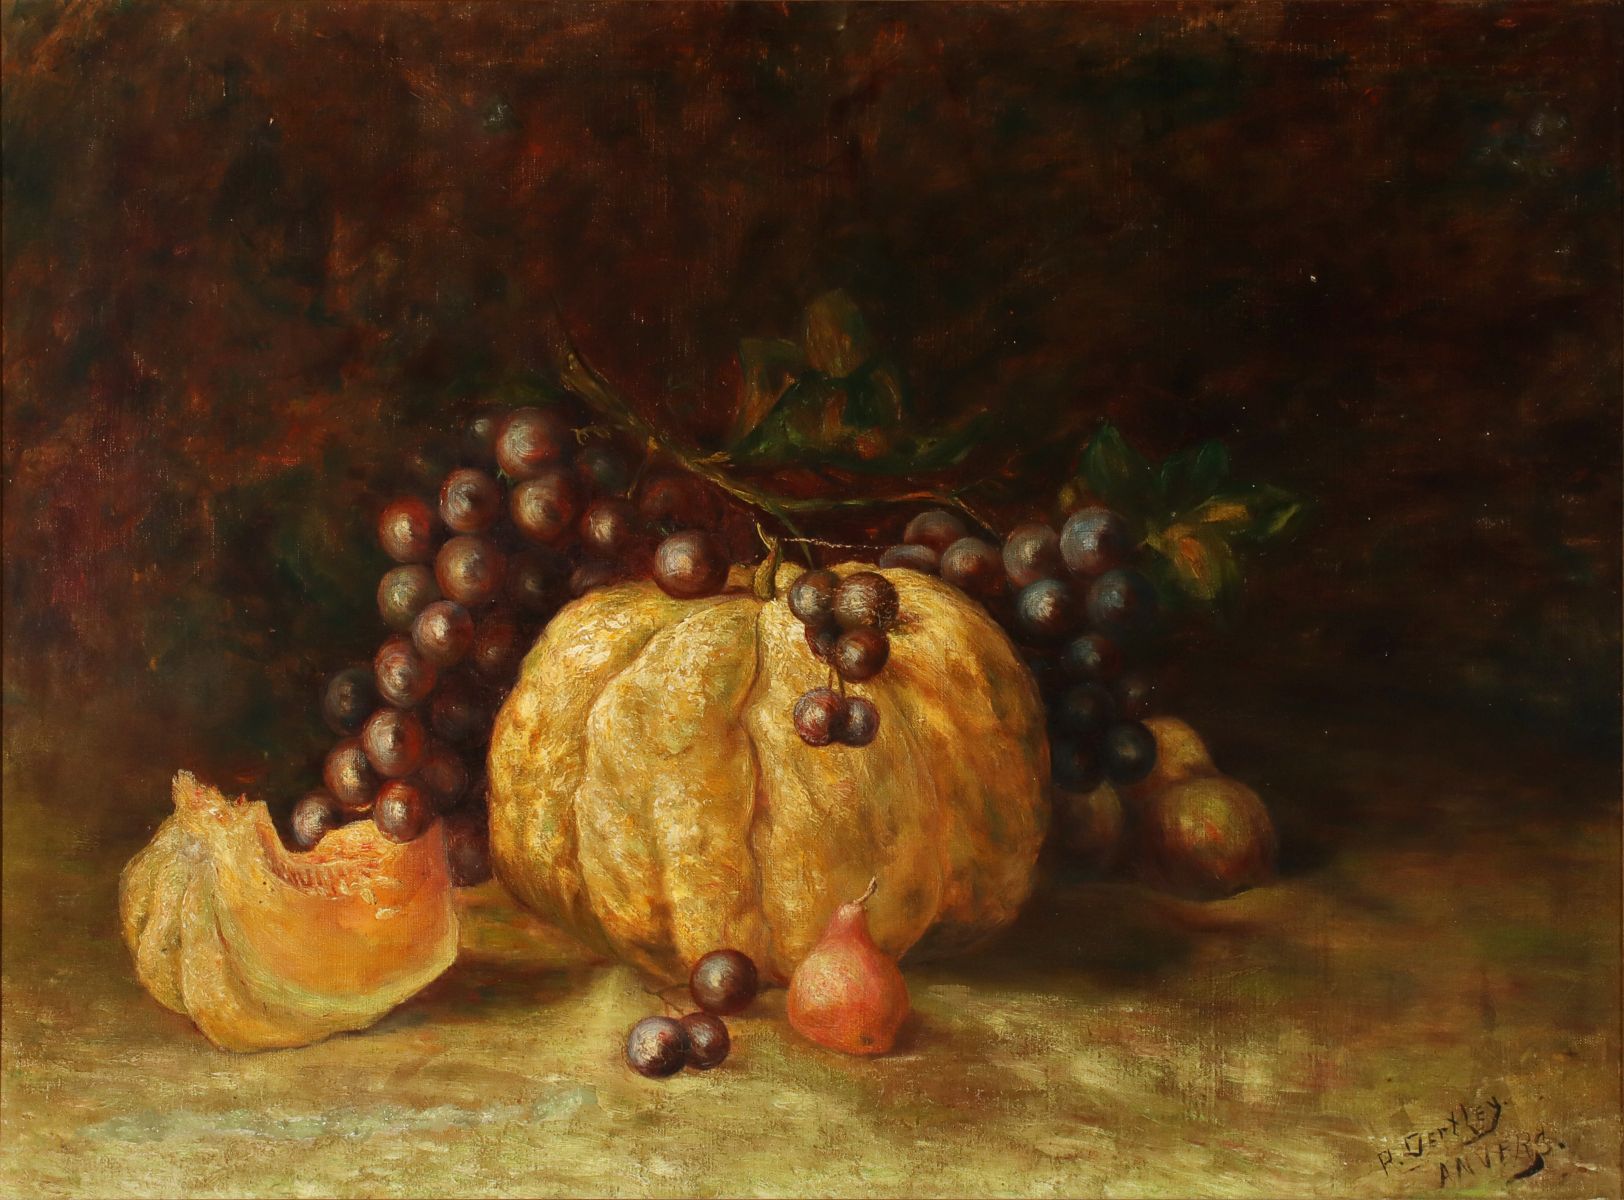 A 19TH C. STILL LIFE OIL ON CANVAS SIGNED 'OERTLEY'